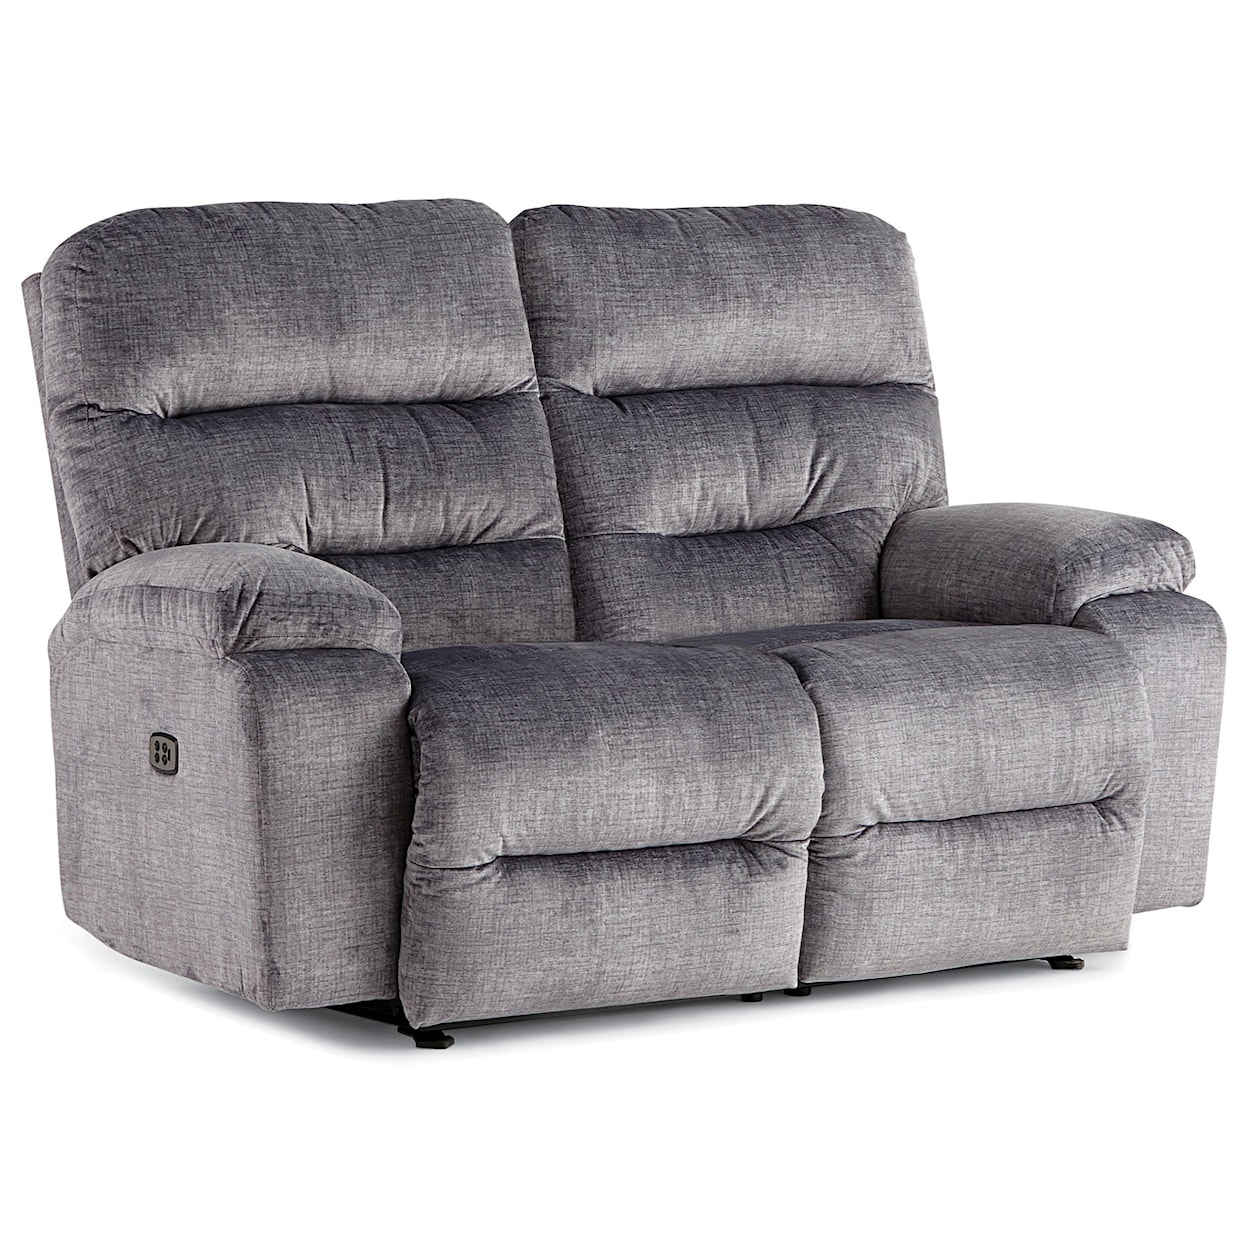 Best Home Furnishings Ryson Power Reclining Space Saver Loveseat